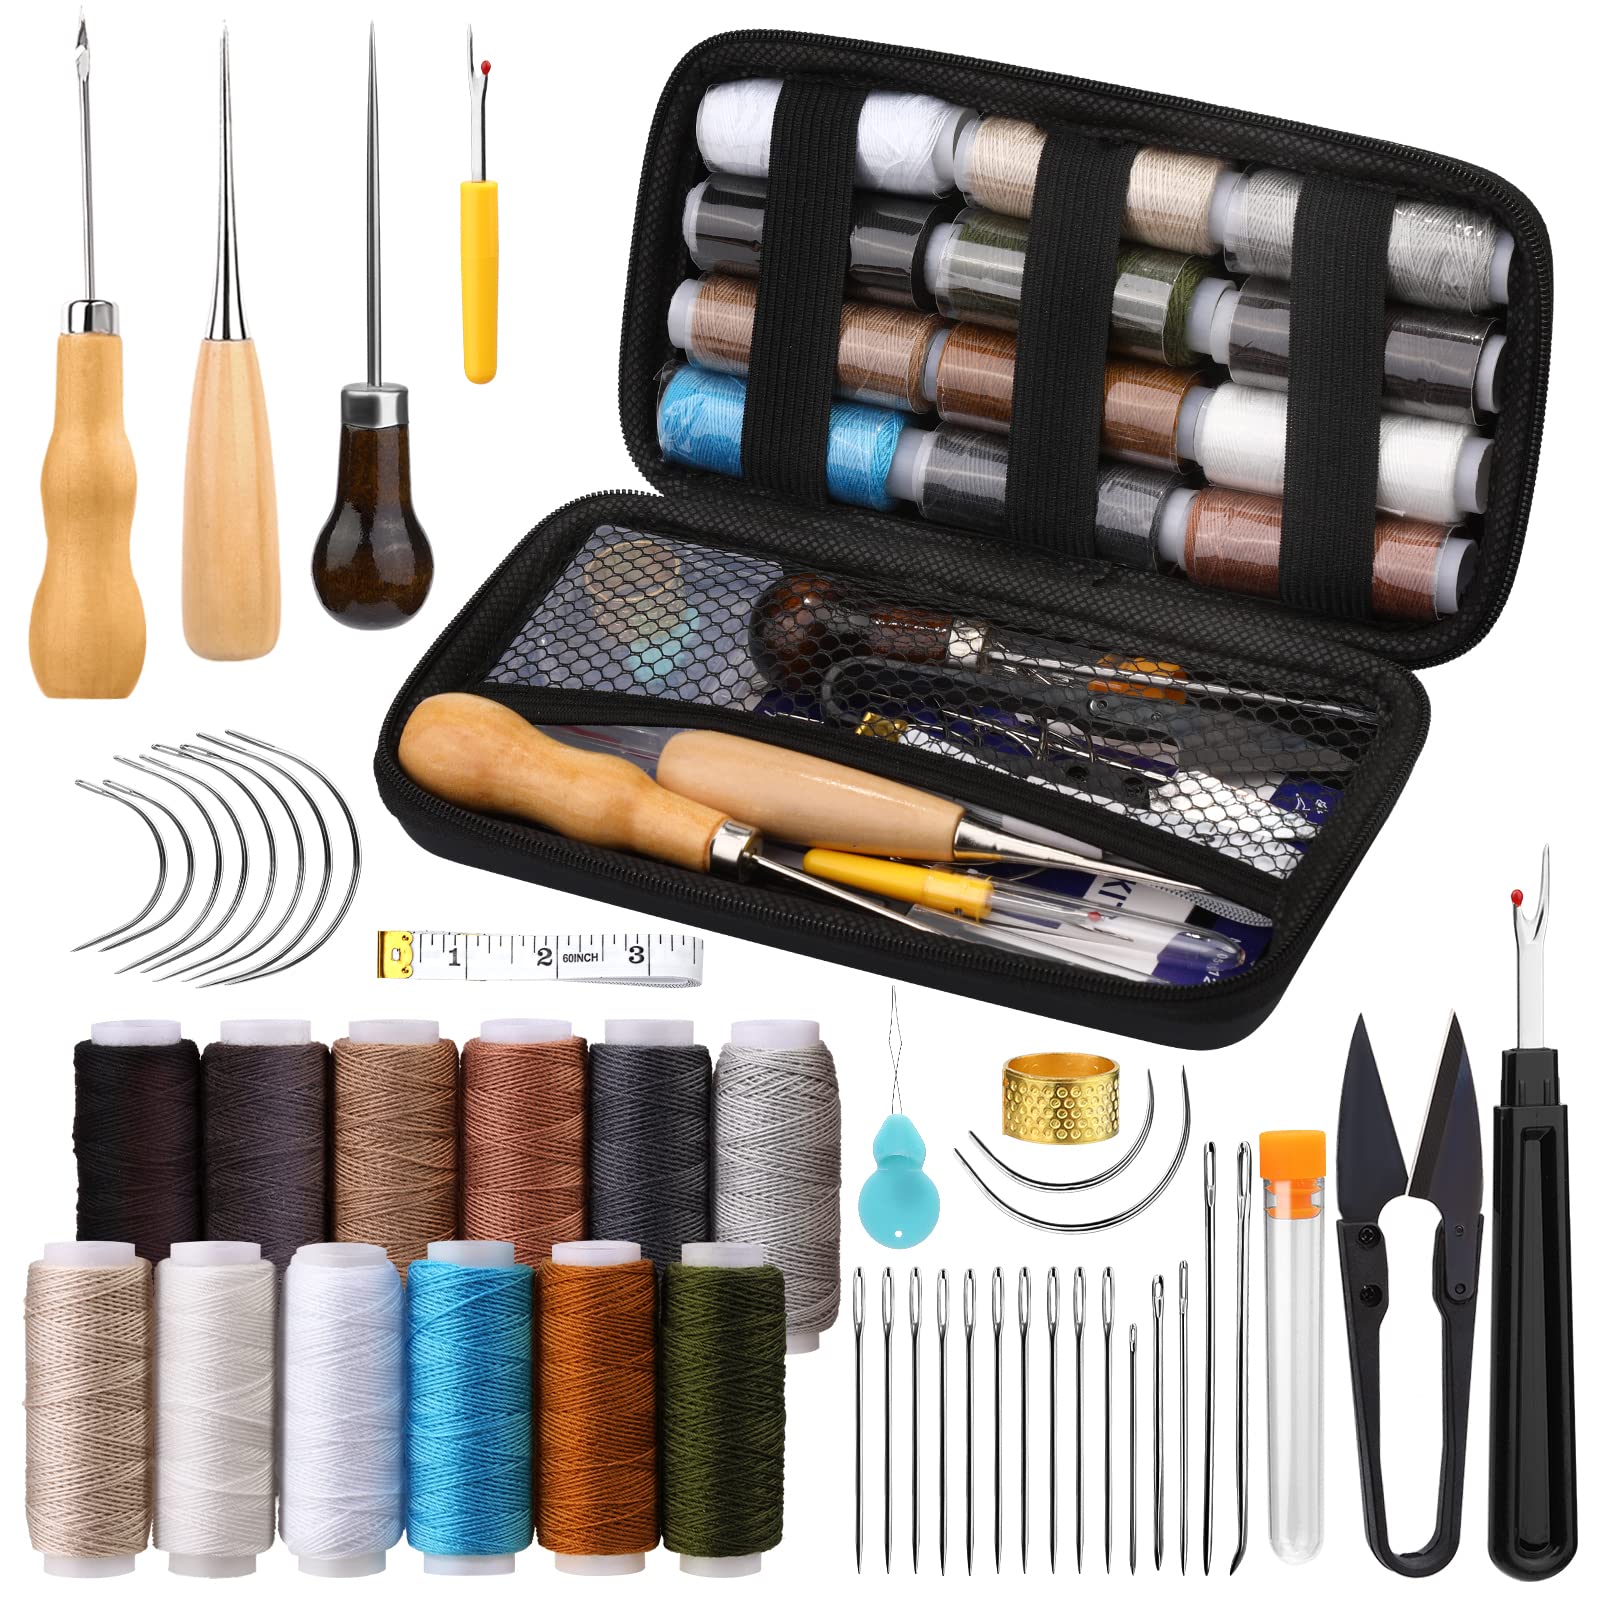 Leather Sewing Kit, Leather Working Tools and Supplies, Leather Working Kit  with Large-Eye Stitching Needles, Waxed Thread, Leather Upholstery Repair  Kit, Leather Sewing Tools for DIY Leather Craft, 